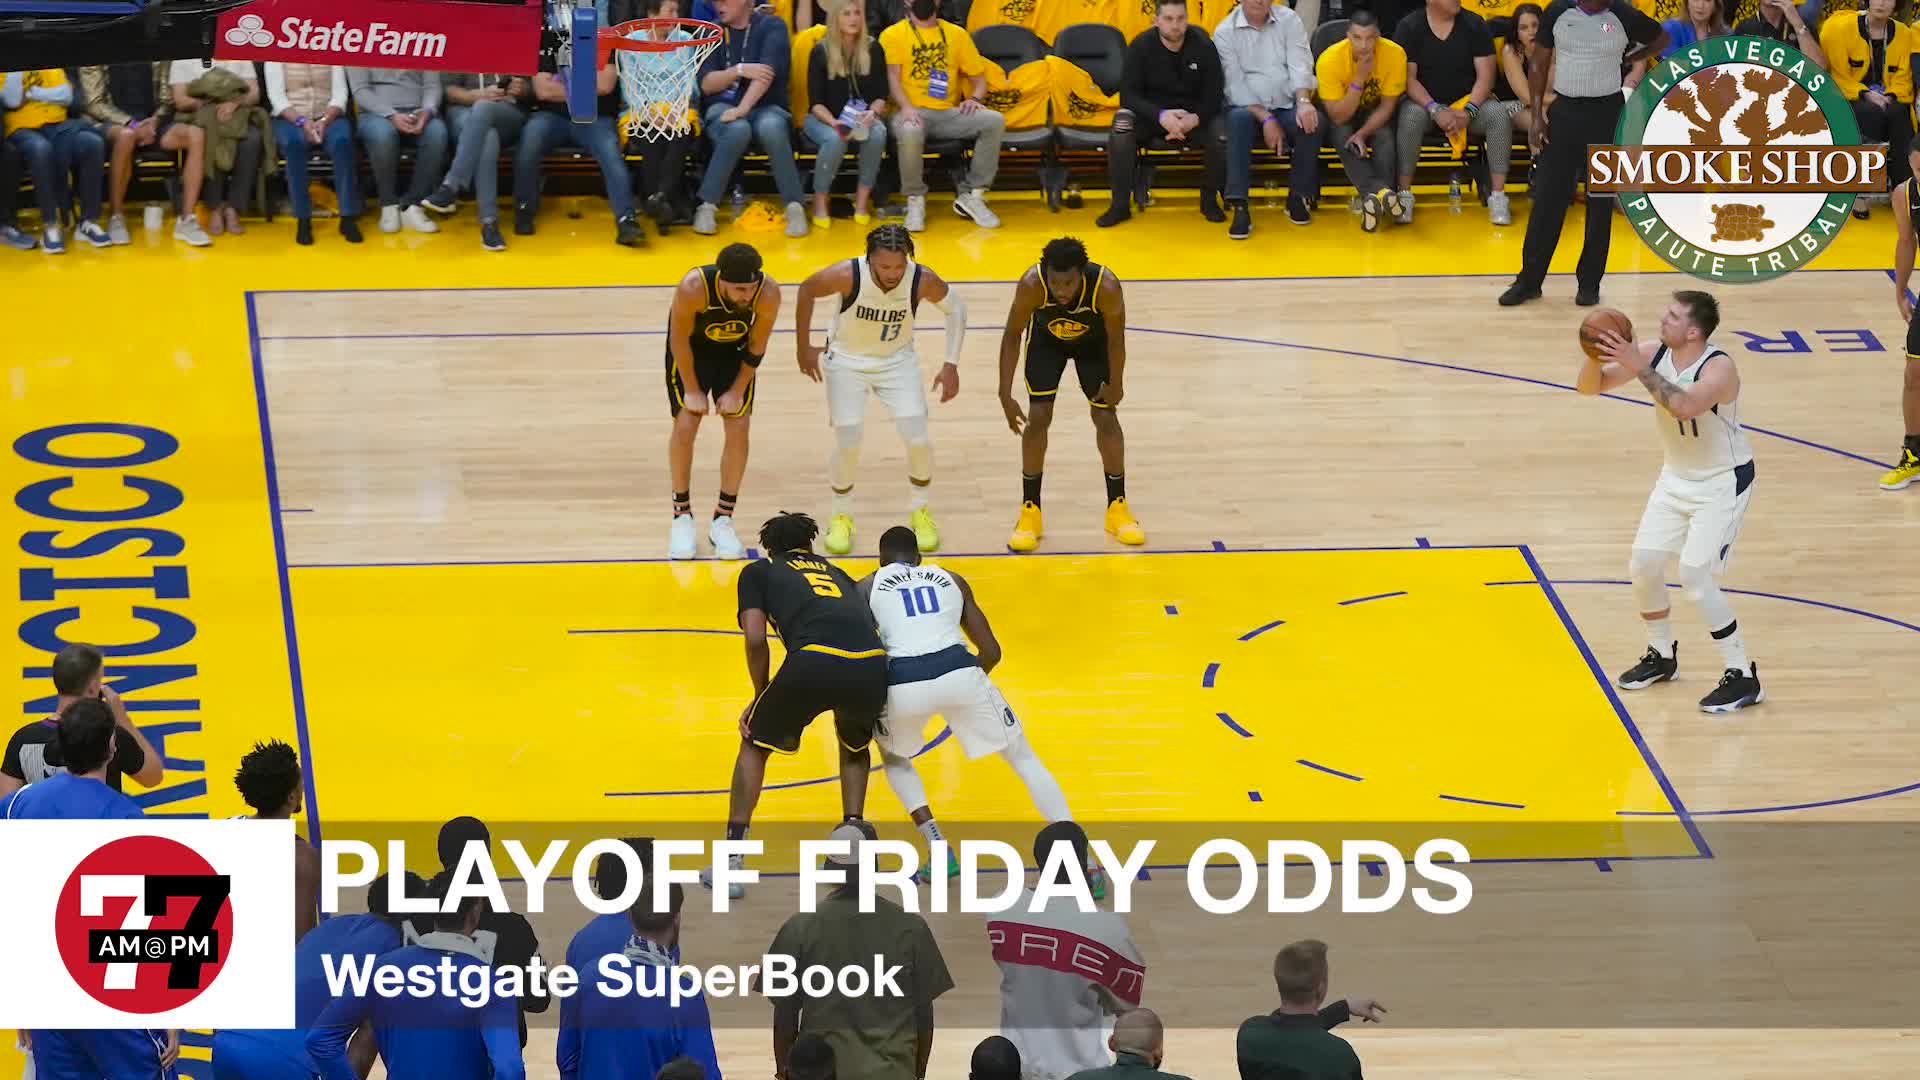 Playoff Friday Odds